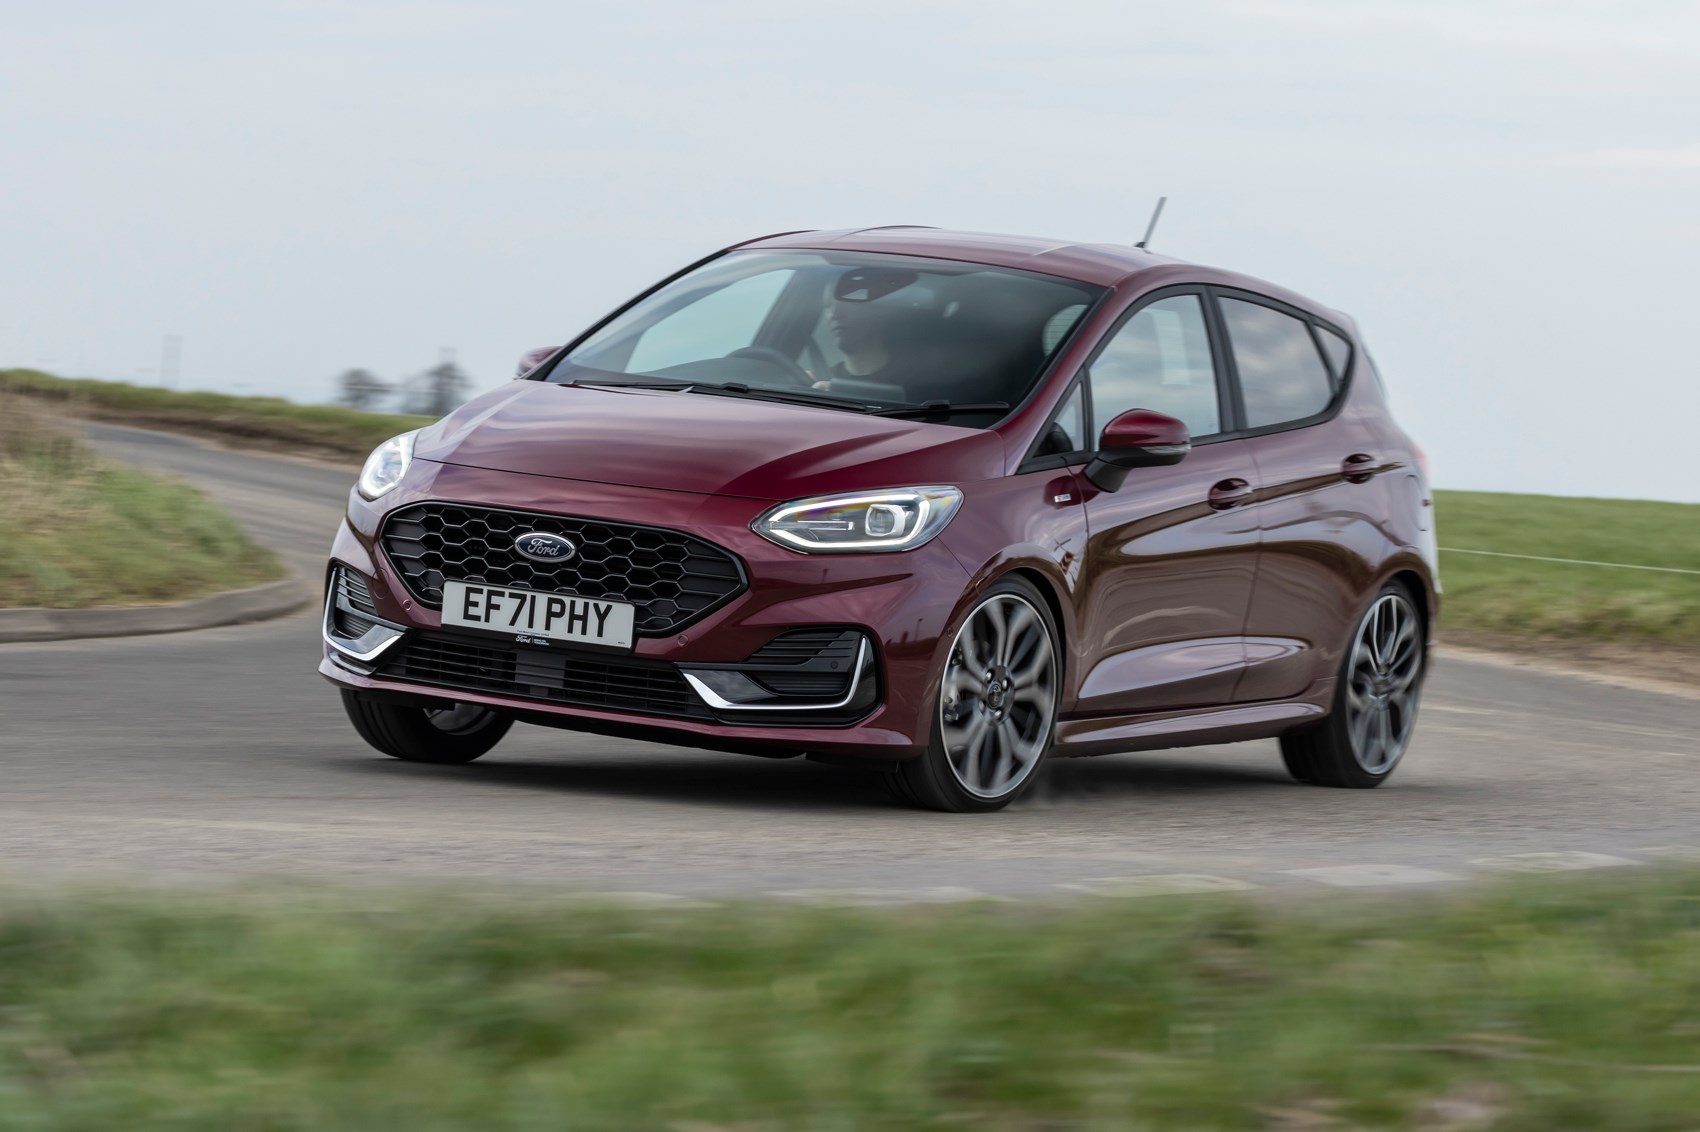 Final Ford Fiesta rolls off production line in Cologne